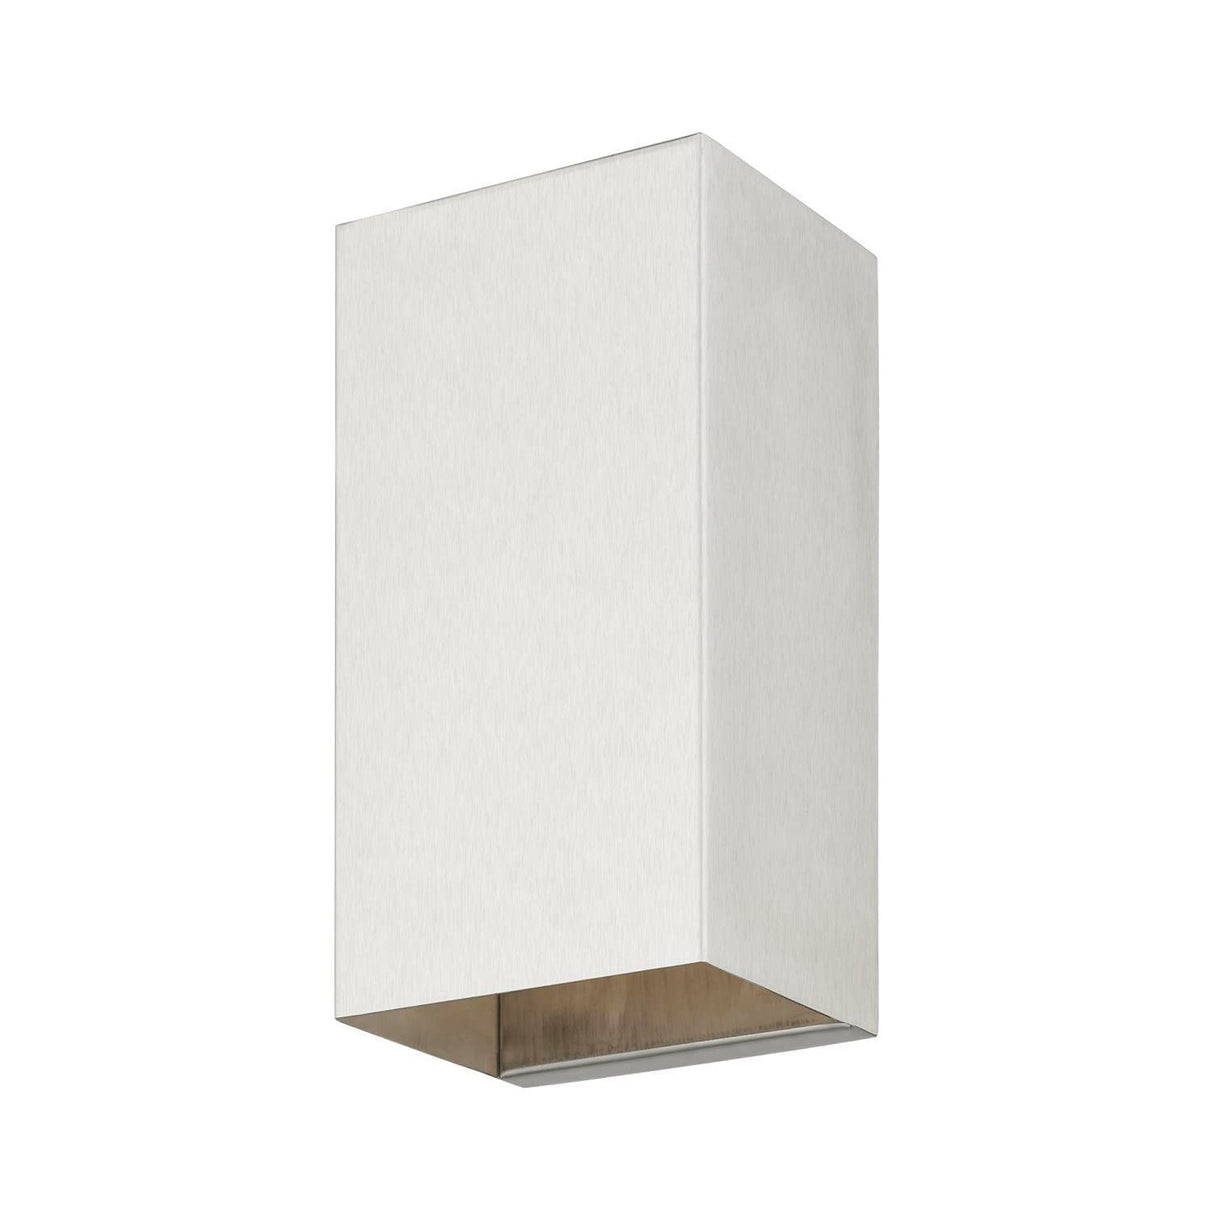 Derby 1 Light Outdoor Sconce in Brushed Nickel (24672-91)